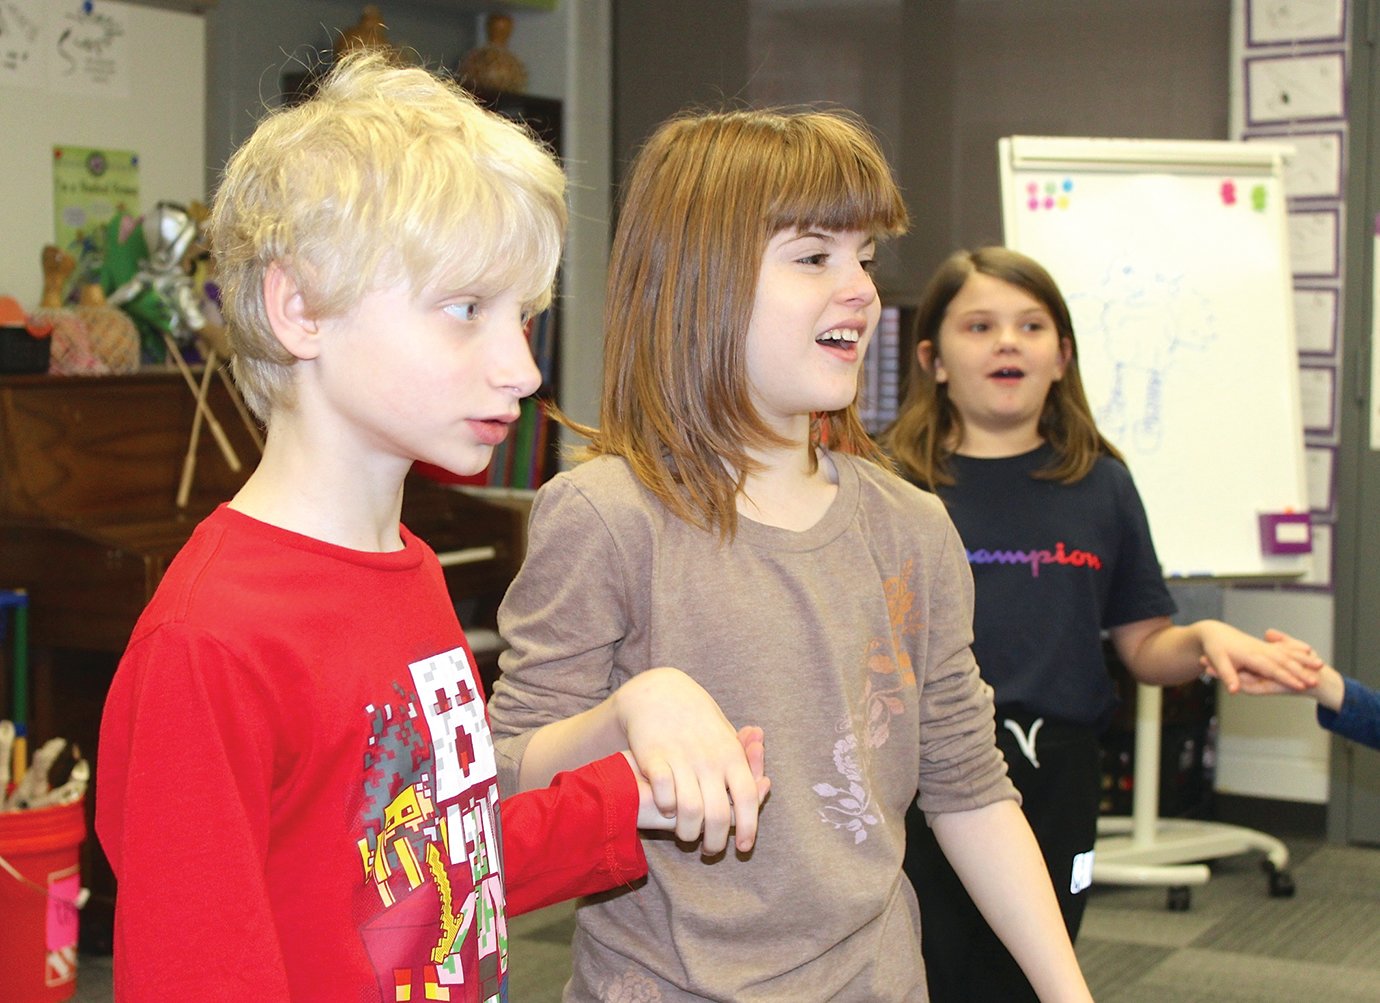 Carson Chandler, left, and dancing partner Cheyenne Parr look to their teacher for the next dance move during music class.